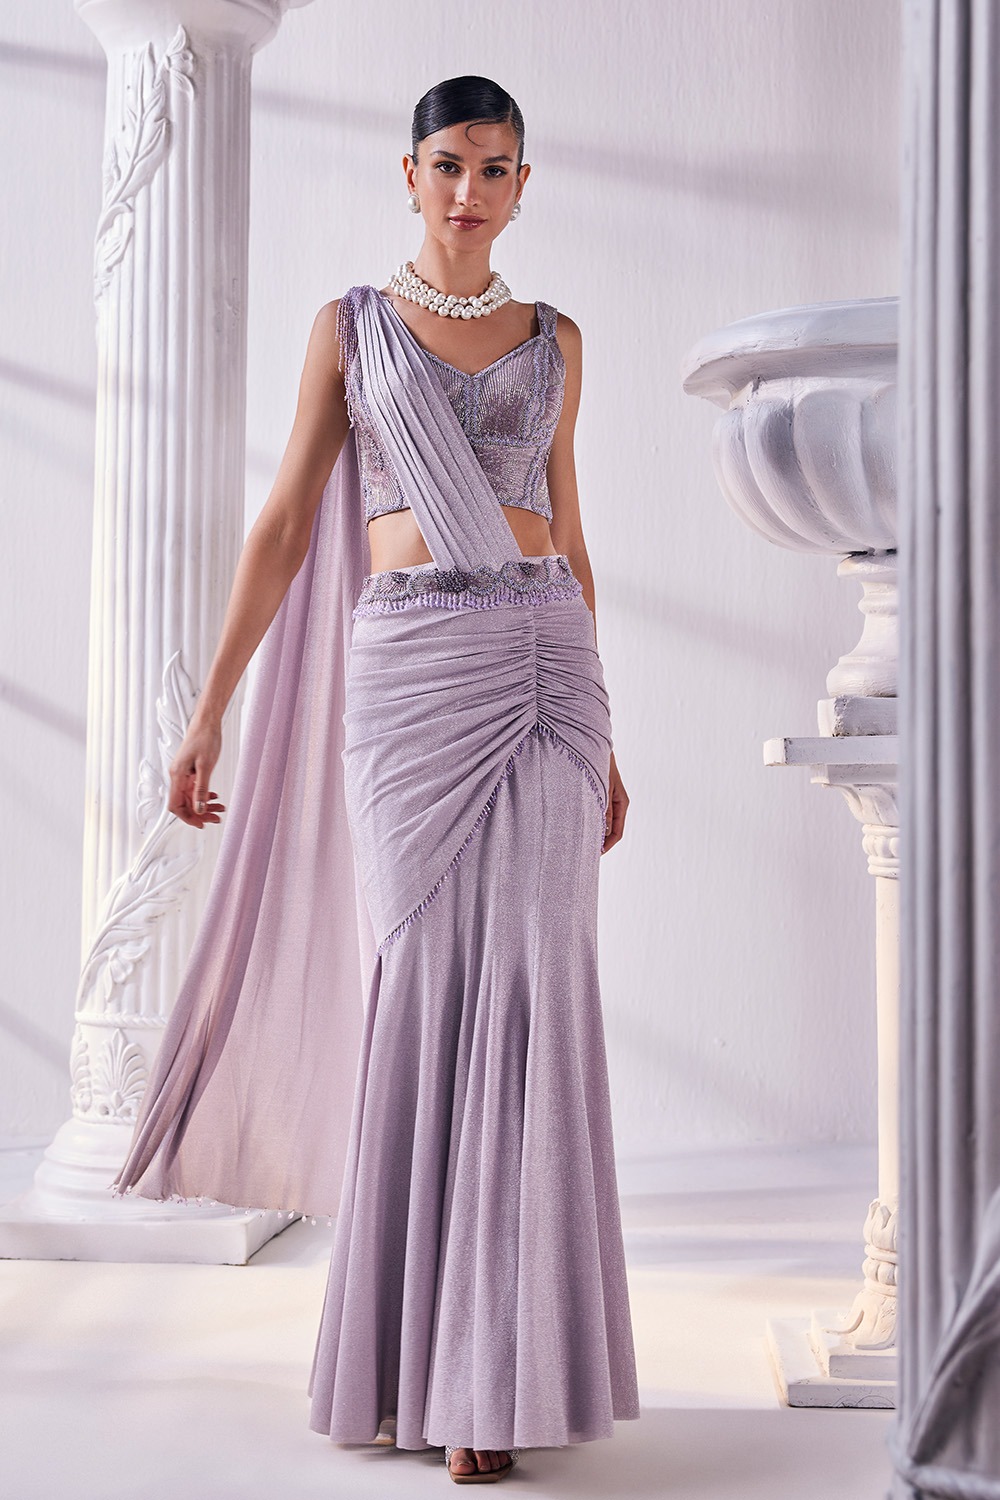 Shimmer Lycra Draped Saree With Corset And a Belt